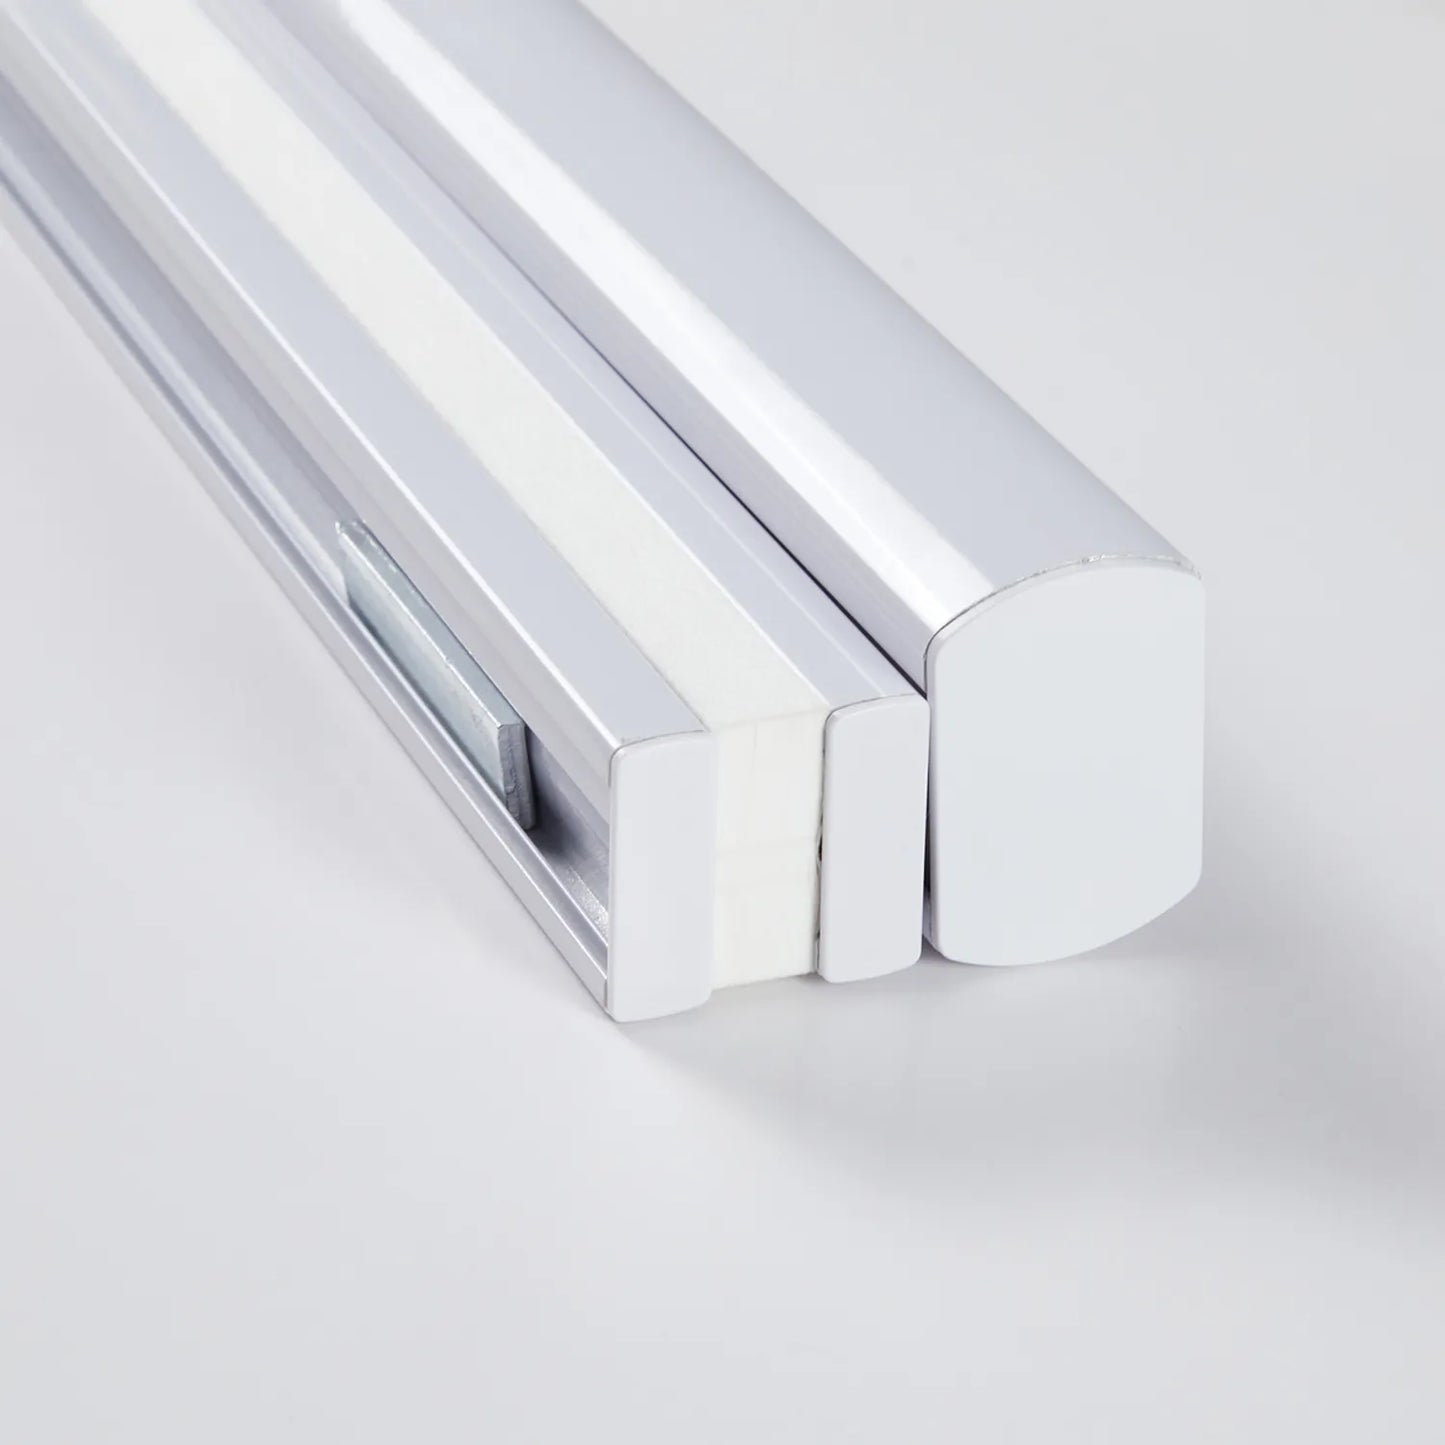 Close-up of cordless top-down bottom-up honeycomb shade mechanism in white and chrome finish for eco-friendly window treatments